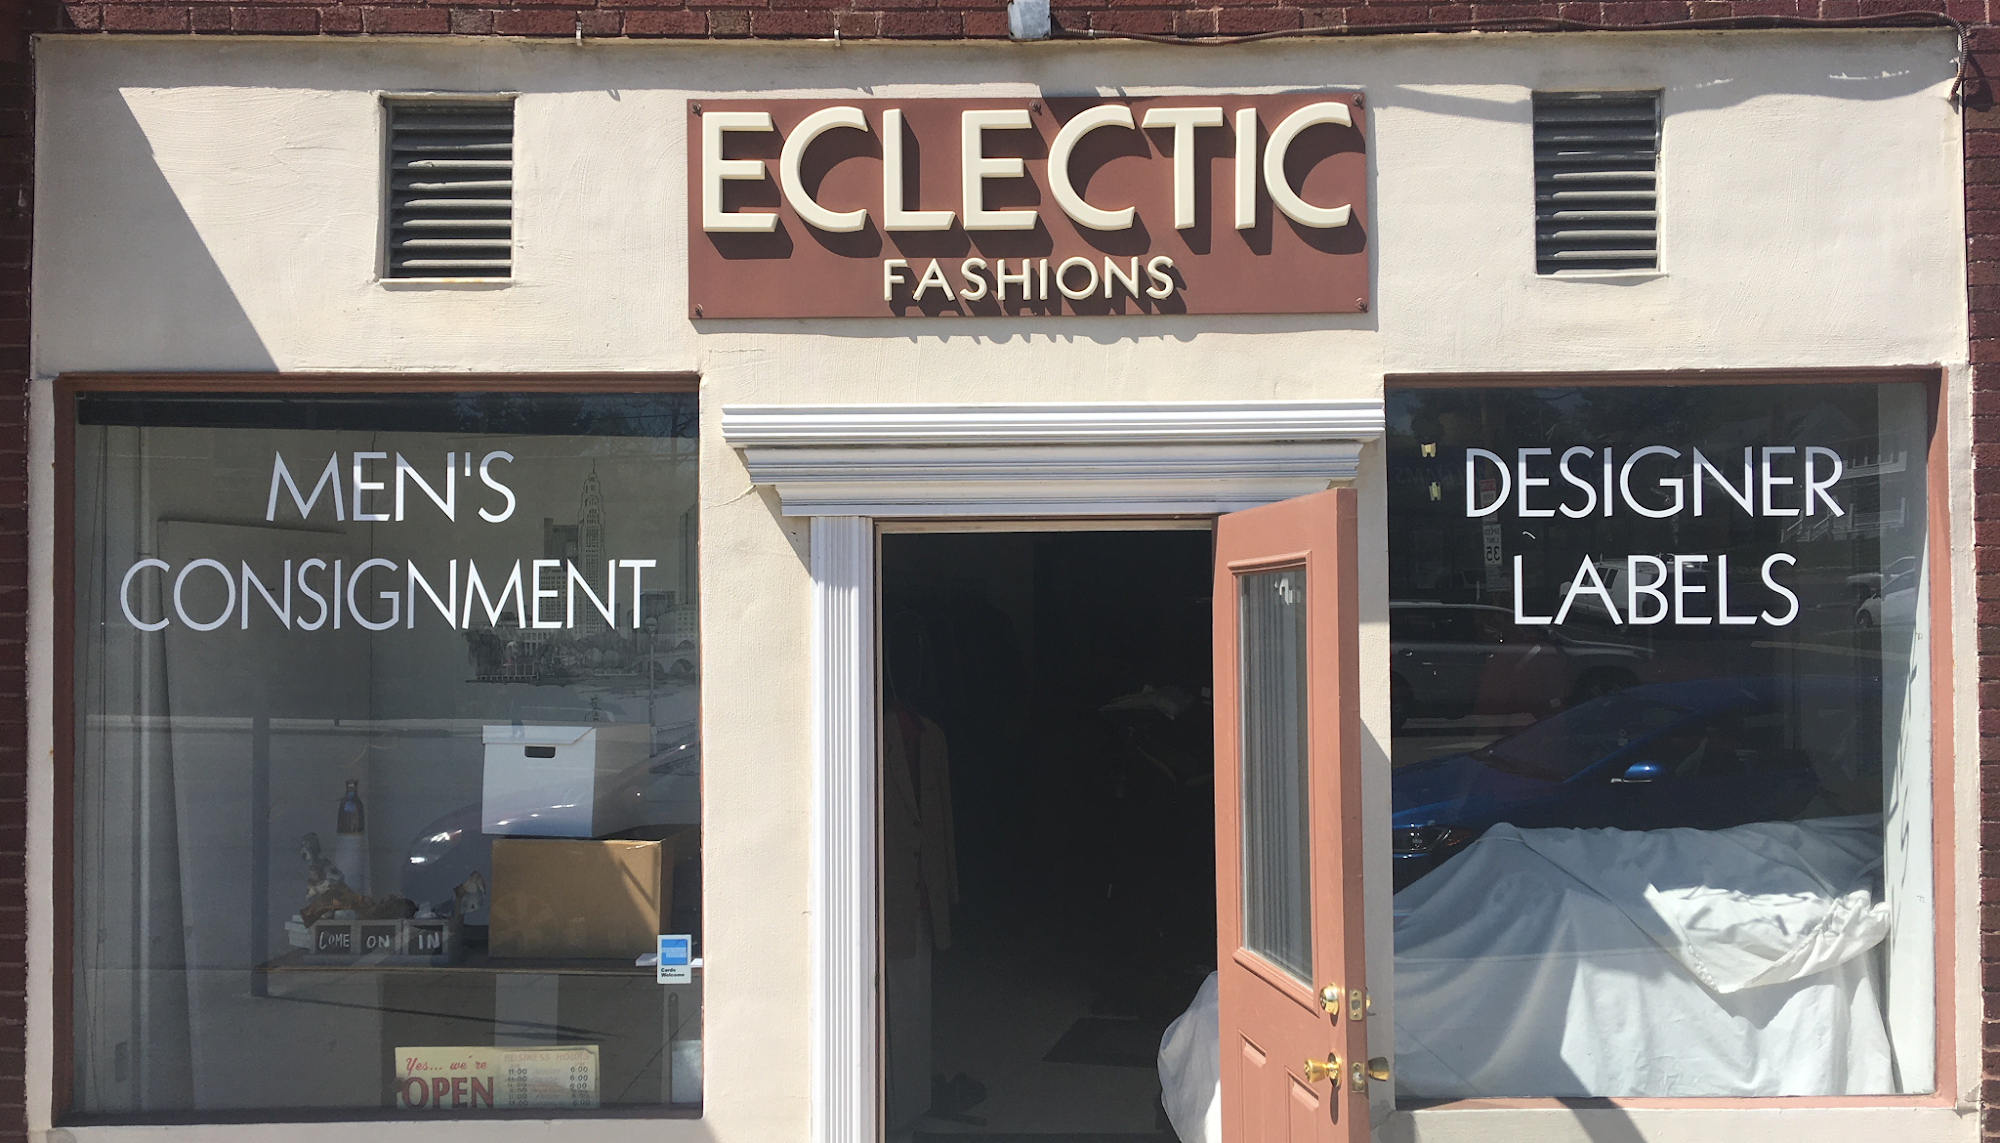 Eclectic Fashions